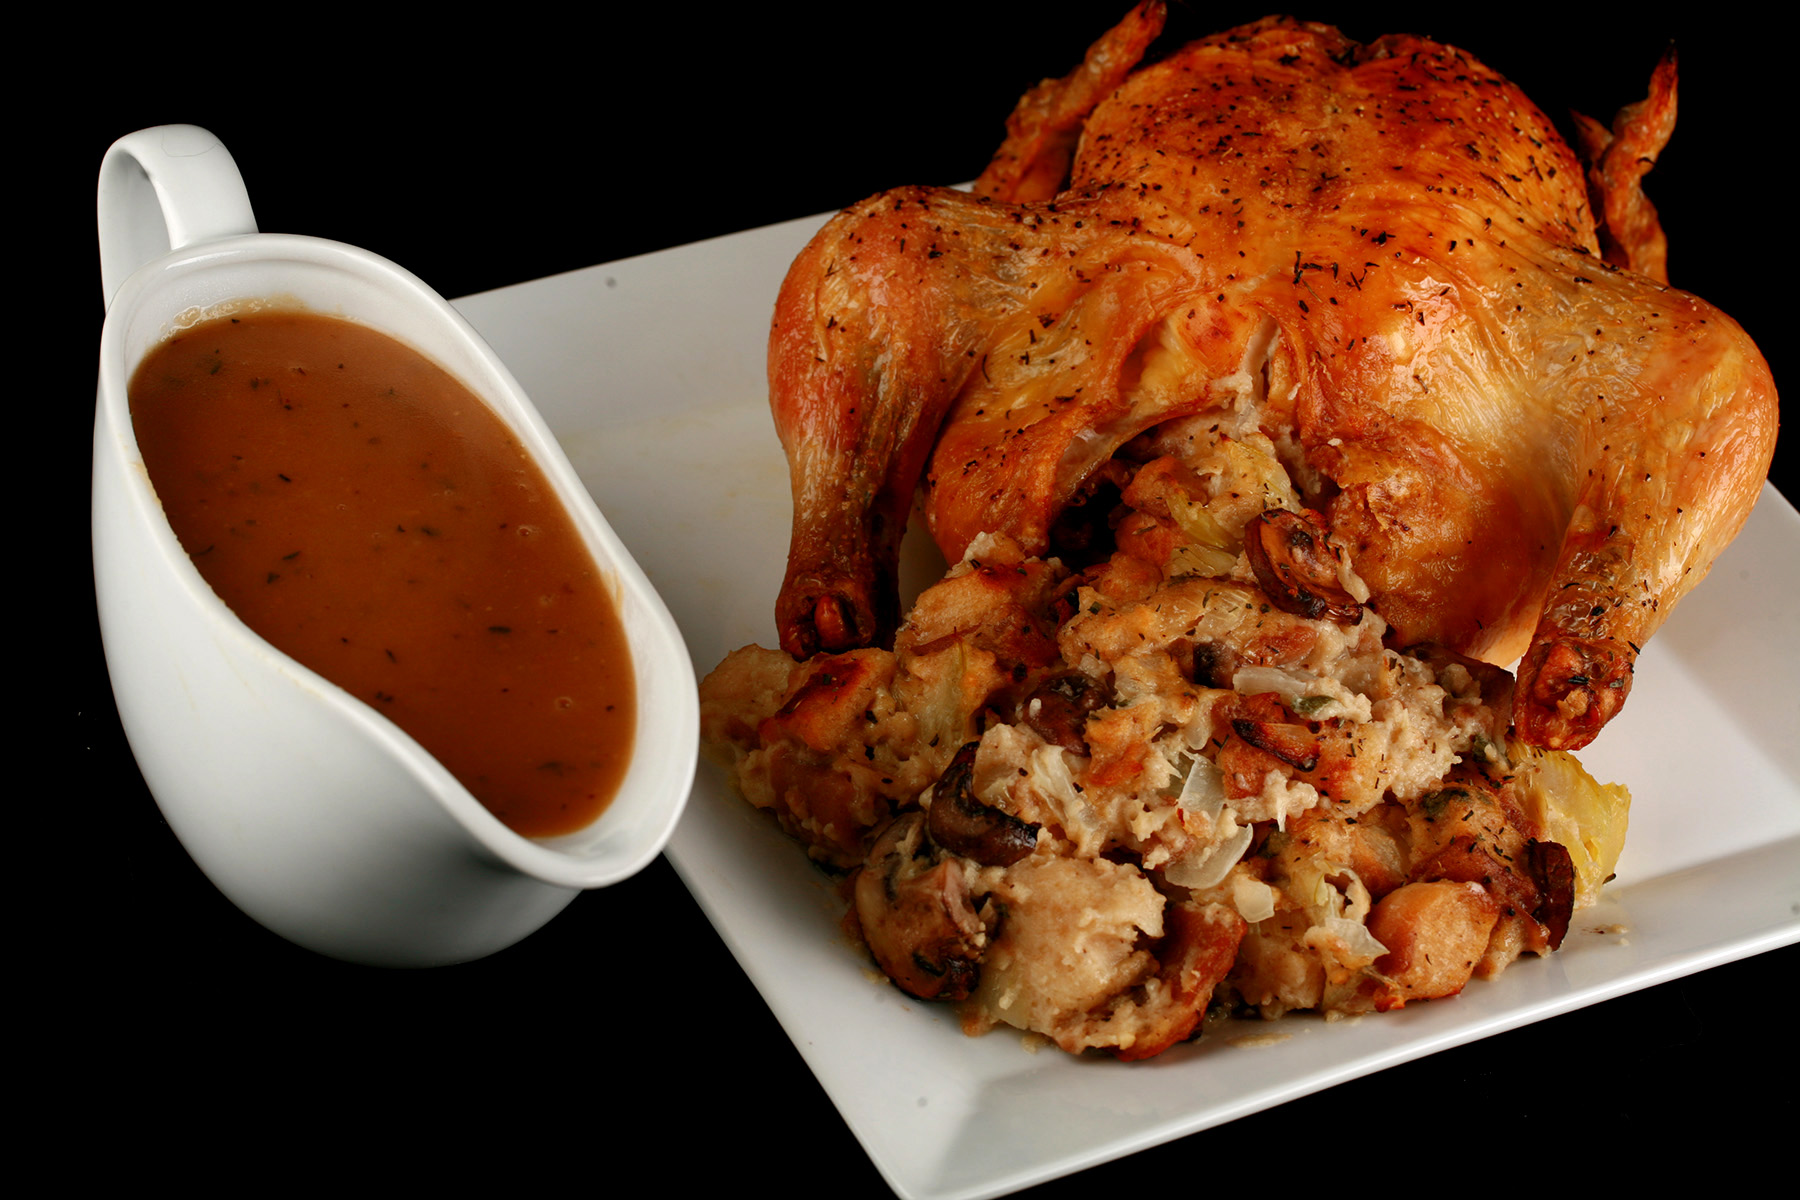 A small roasted turkey on a platter, with gluten-free stuffing spilling out from it. There is a gravy boat with gluten-free gravy in it, next to the turkey.